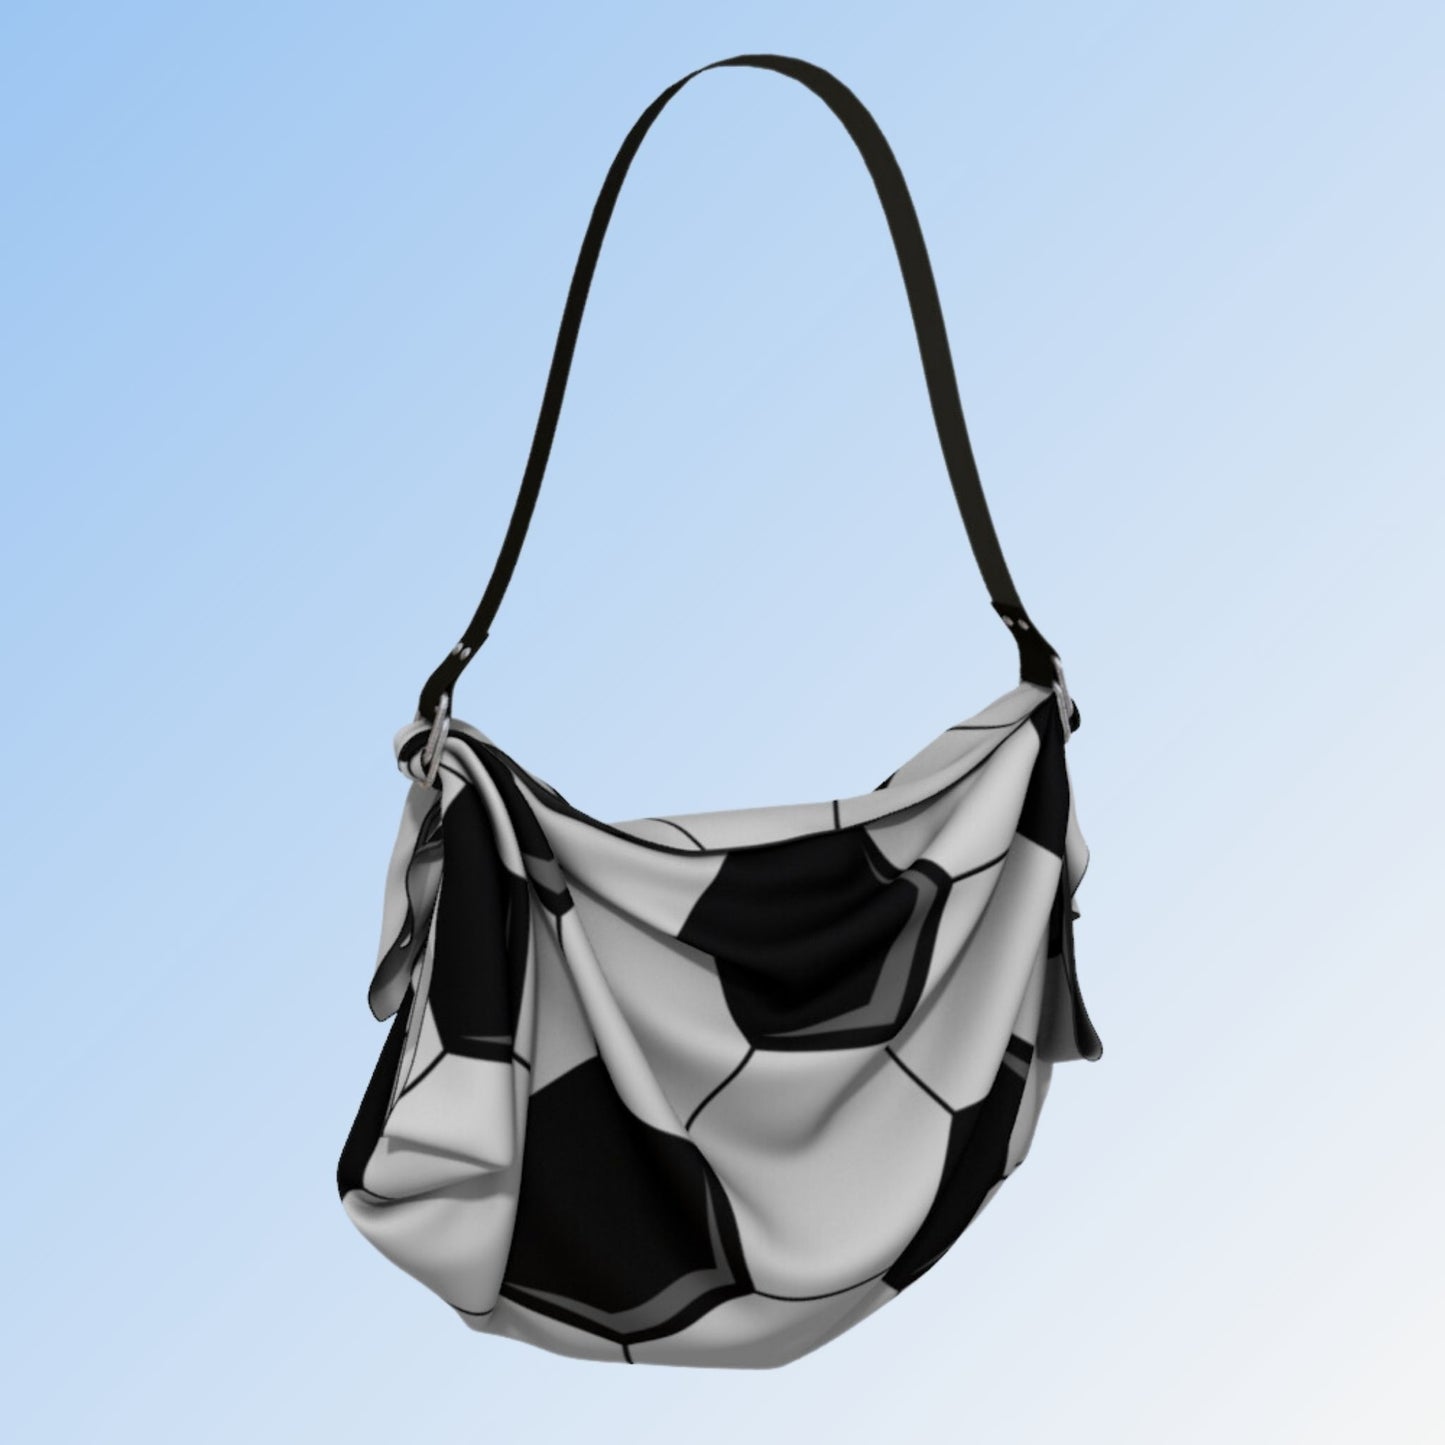 Origami Cloth Soccer Ball Pattern Tote Bag